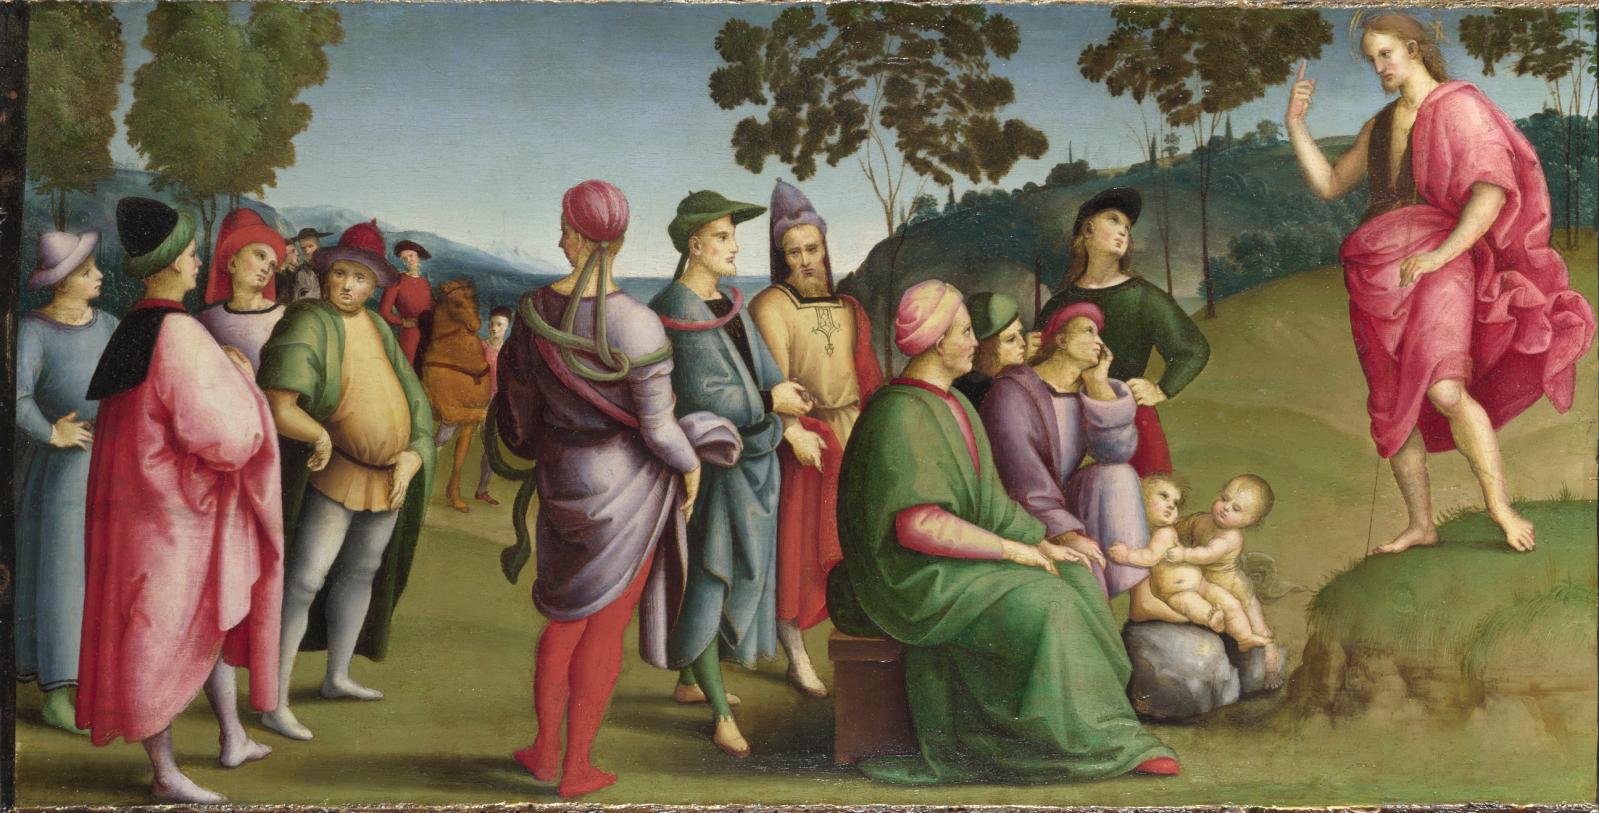 Raphael “The Universal Artist” at The National Gallery, London